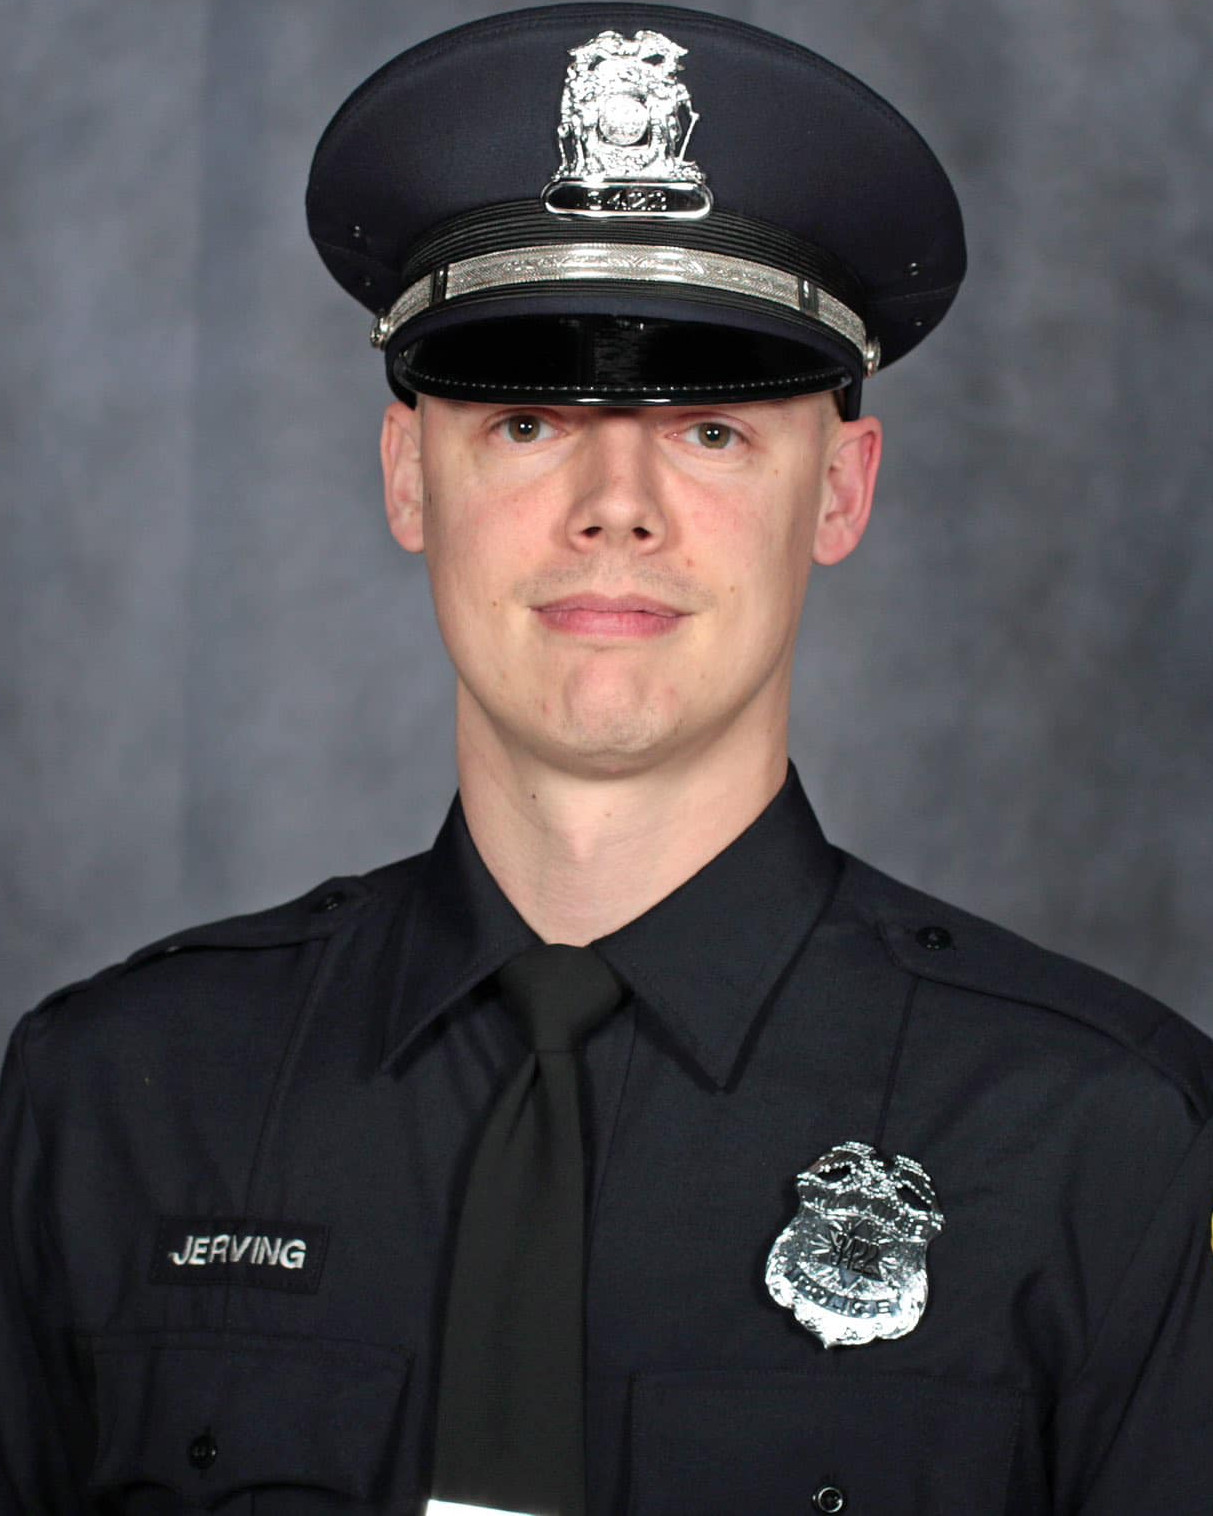 Police Officer Peter E. C. Jerving | Milwaukee Police Department, Wisconsin